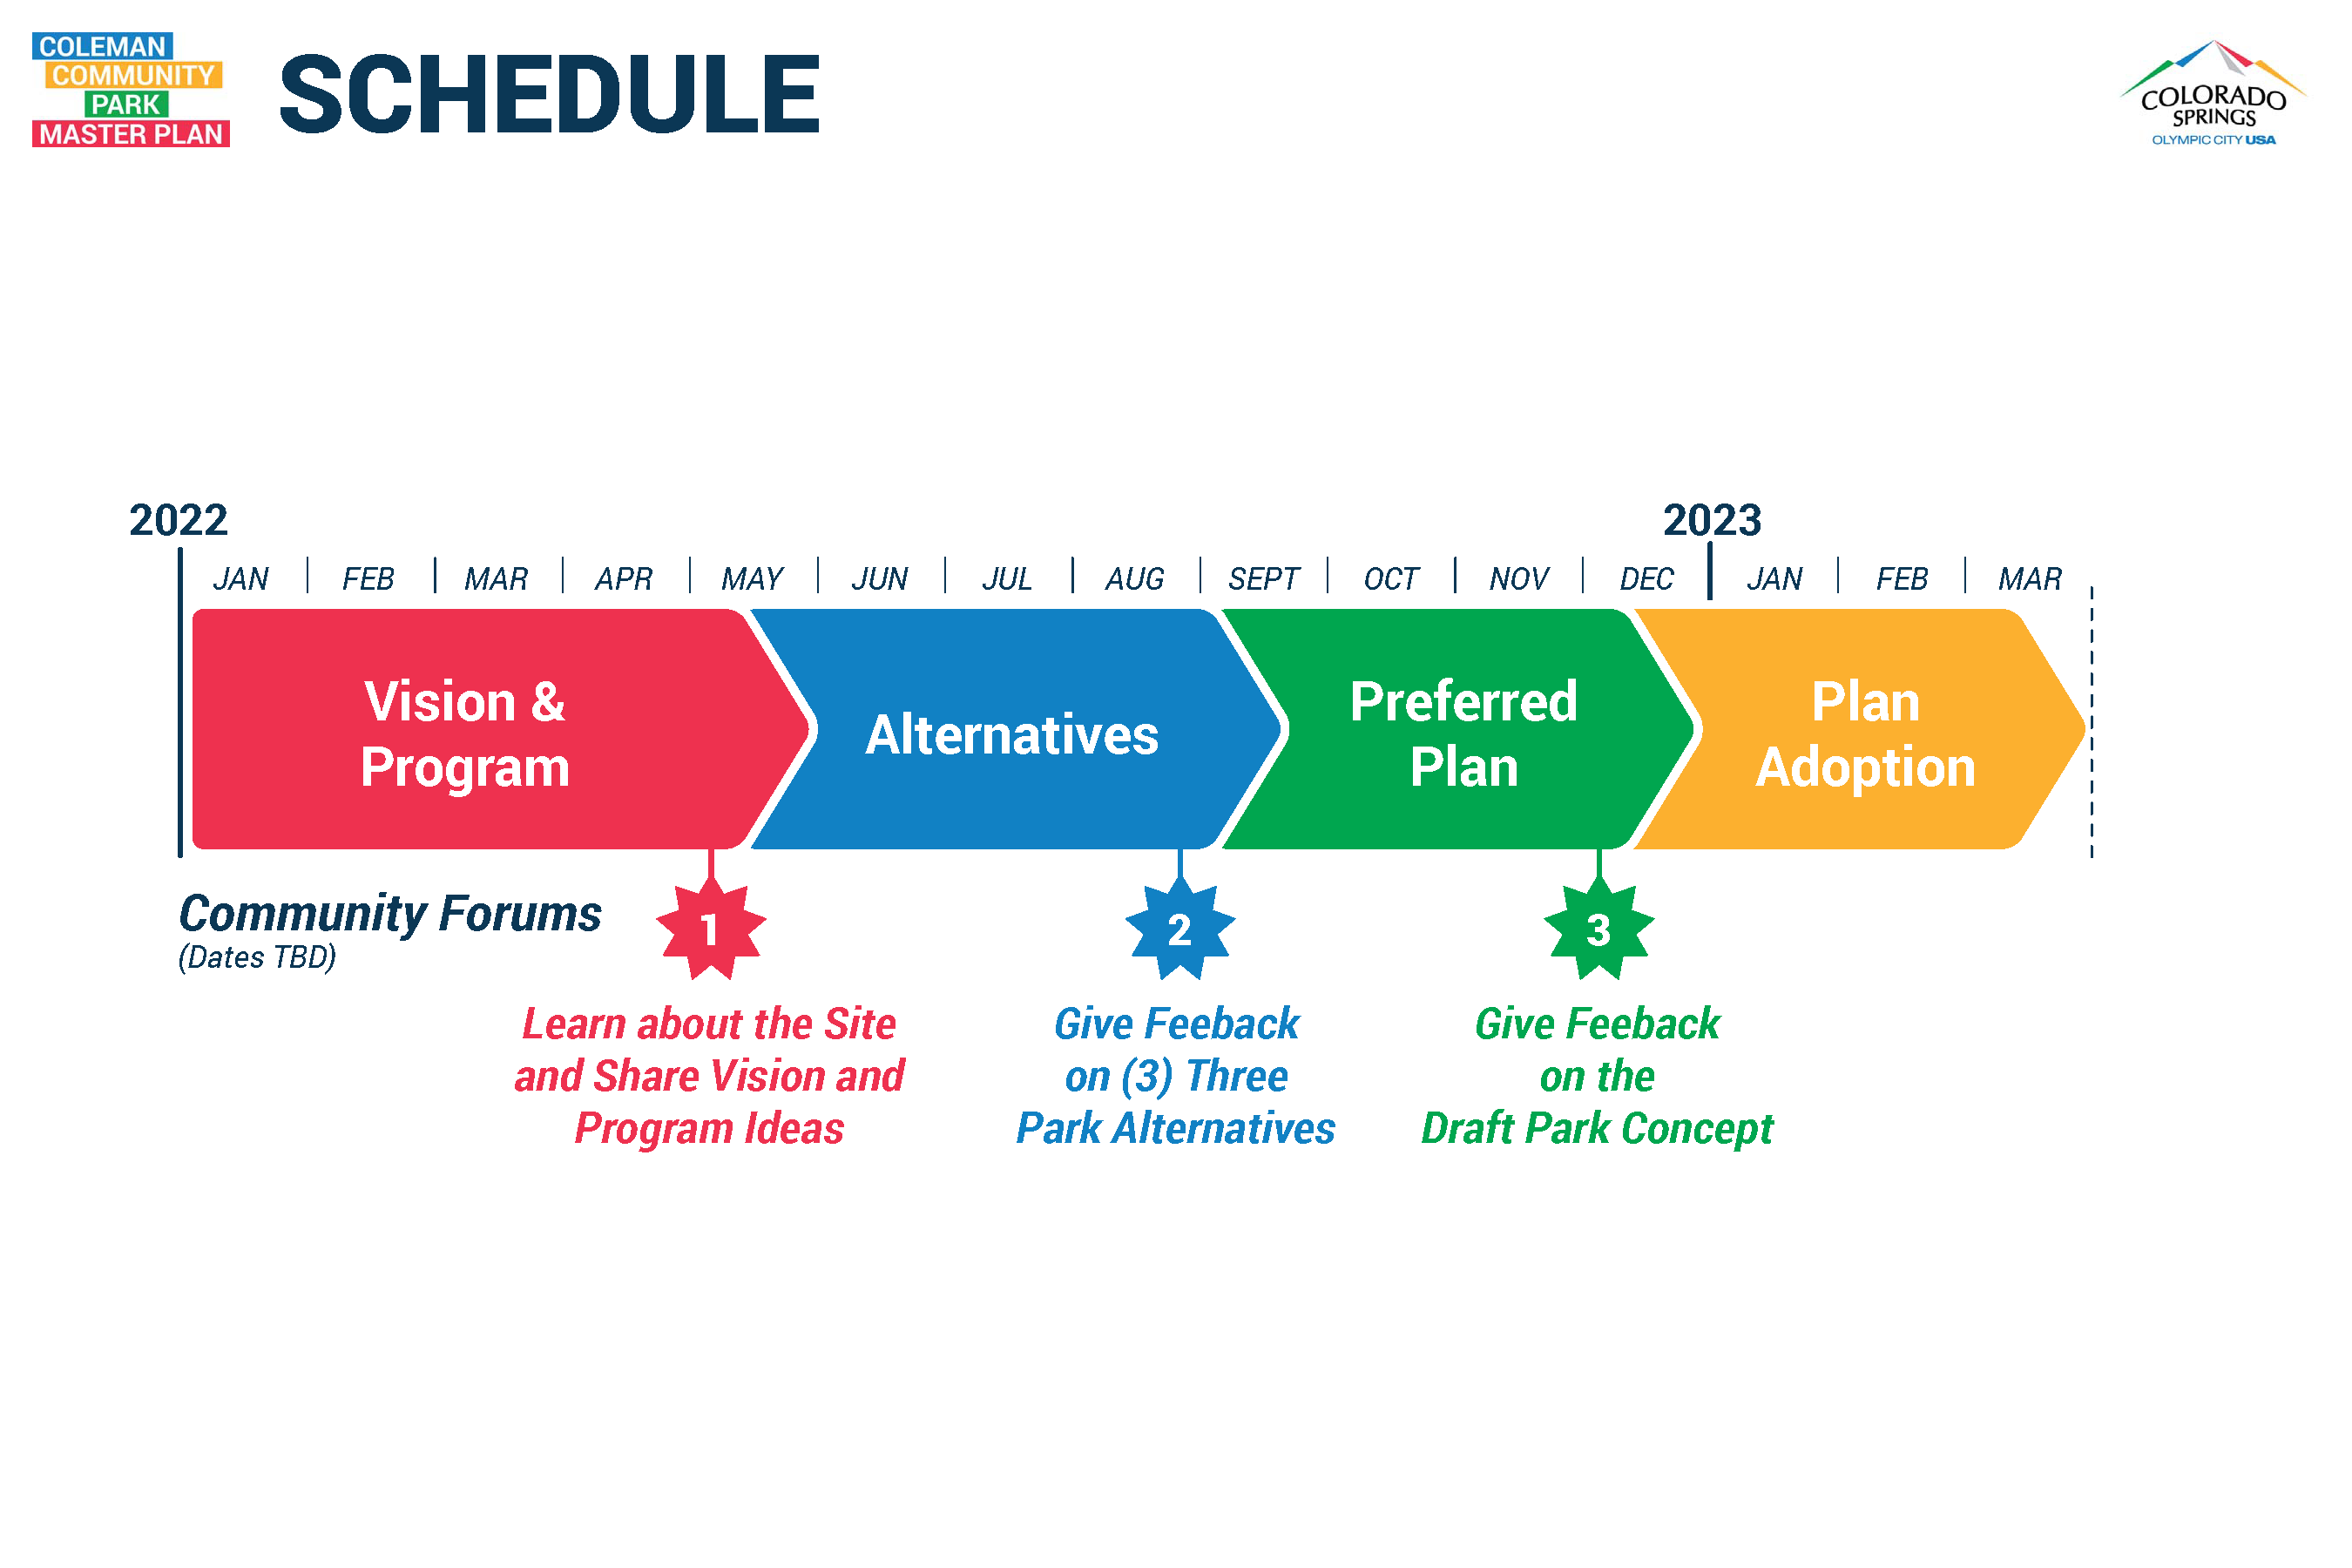 Vision & Program January to May, Alternatives May to September, Preferred Plan Sept to Dec, Plan Adoption March 2023